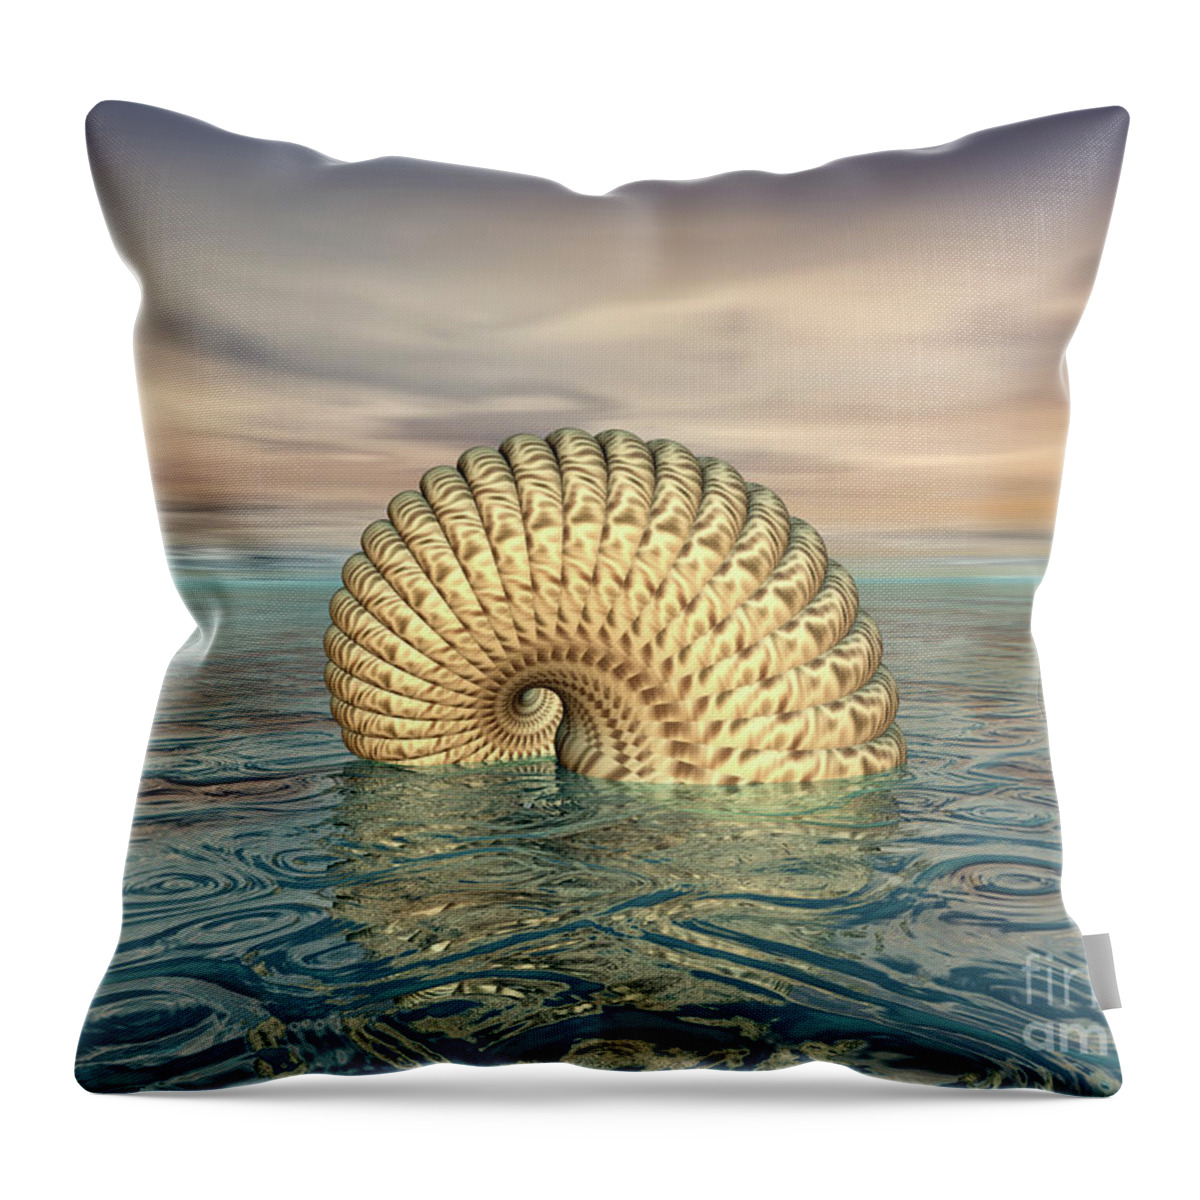 Creature Throw Pillow featuring the digital art Mysterious Creature by Phil Perkins